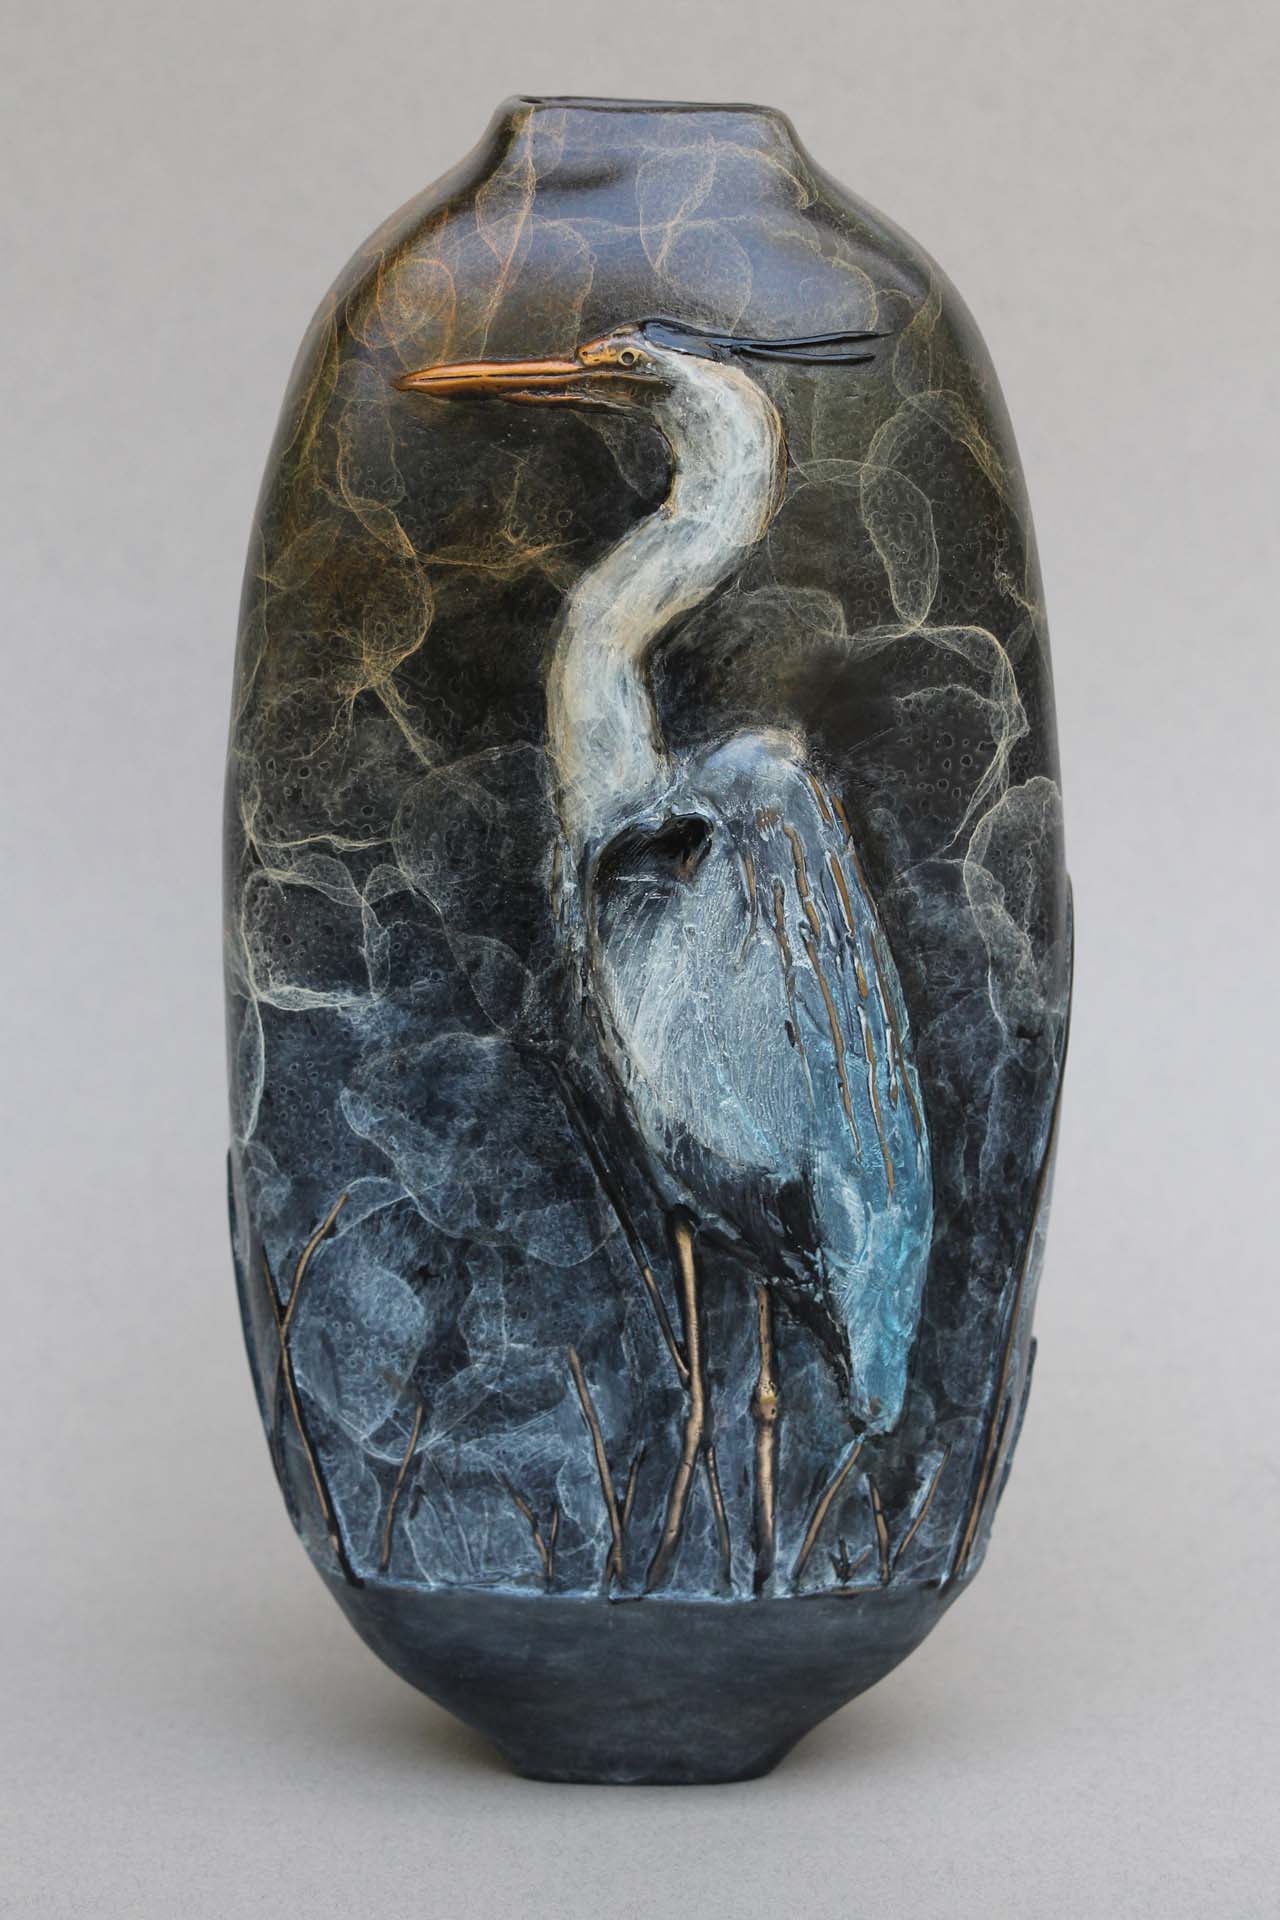 Side 1 of the Great Blue Heron vase. The Blue Heron standing at attention.